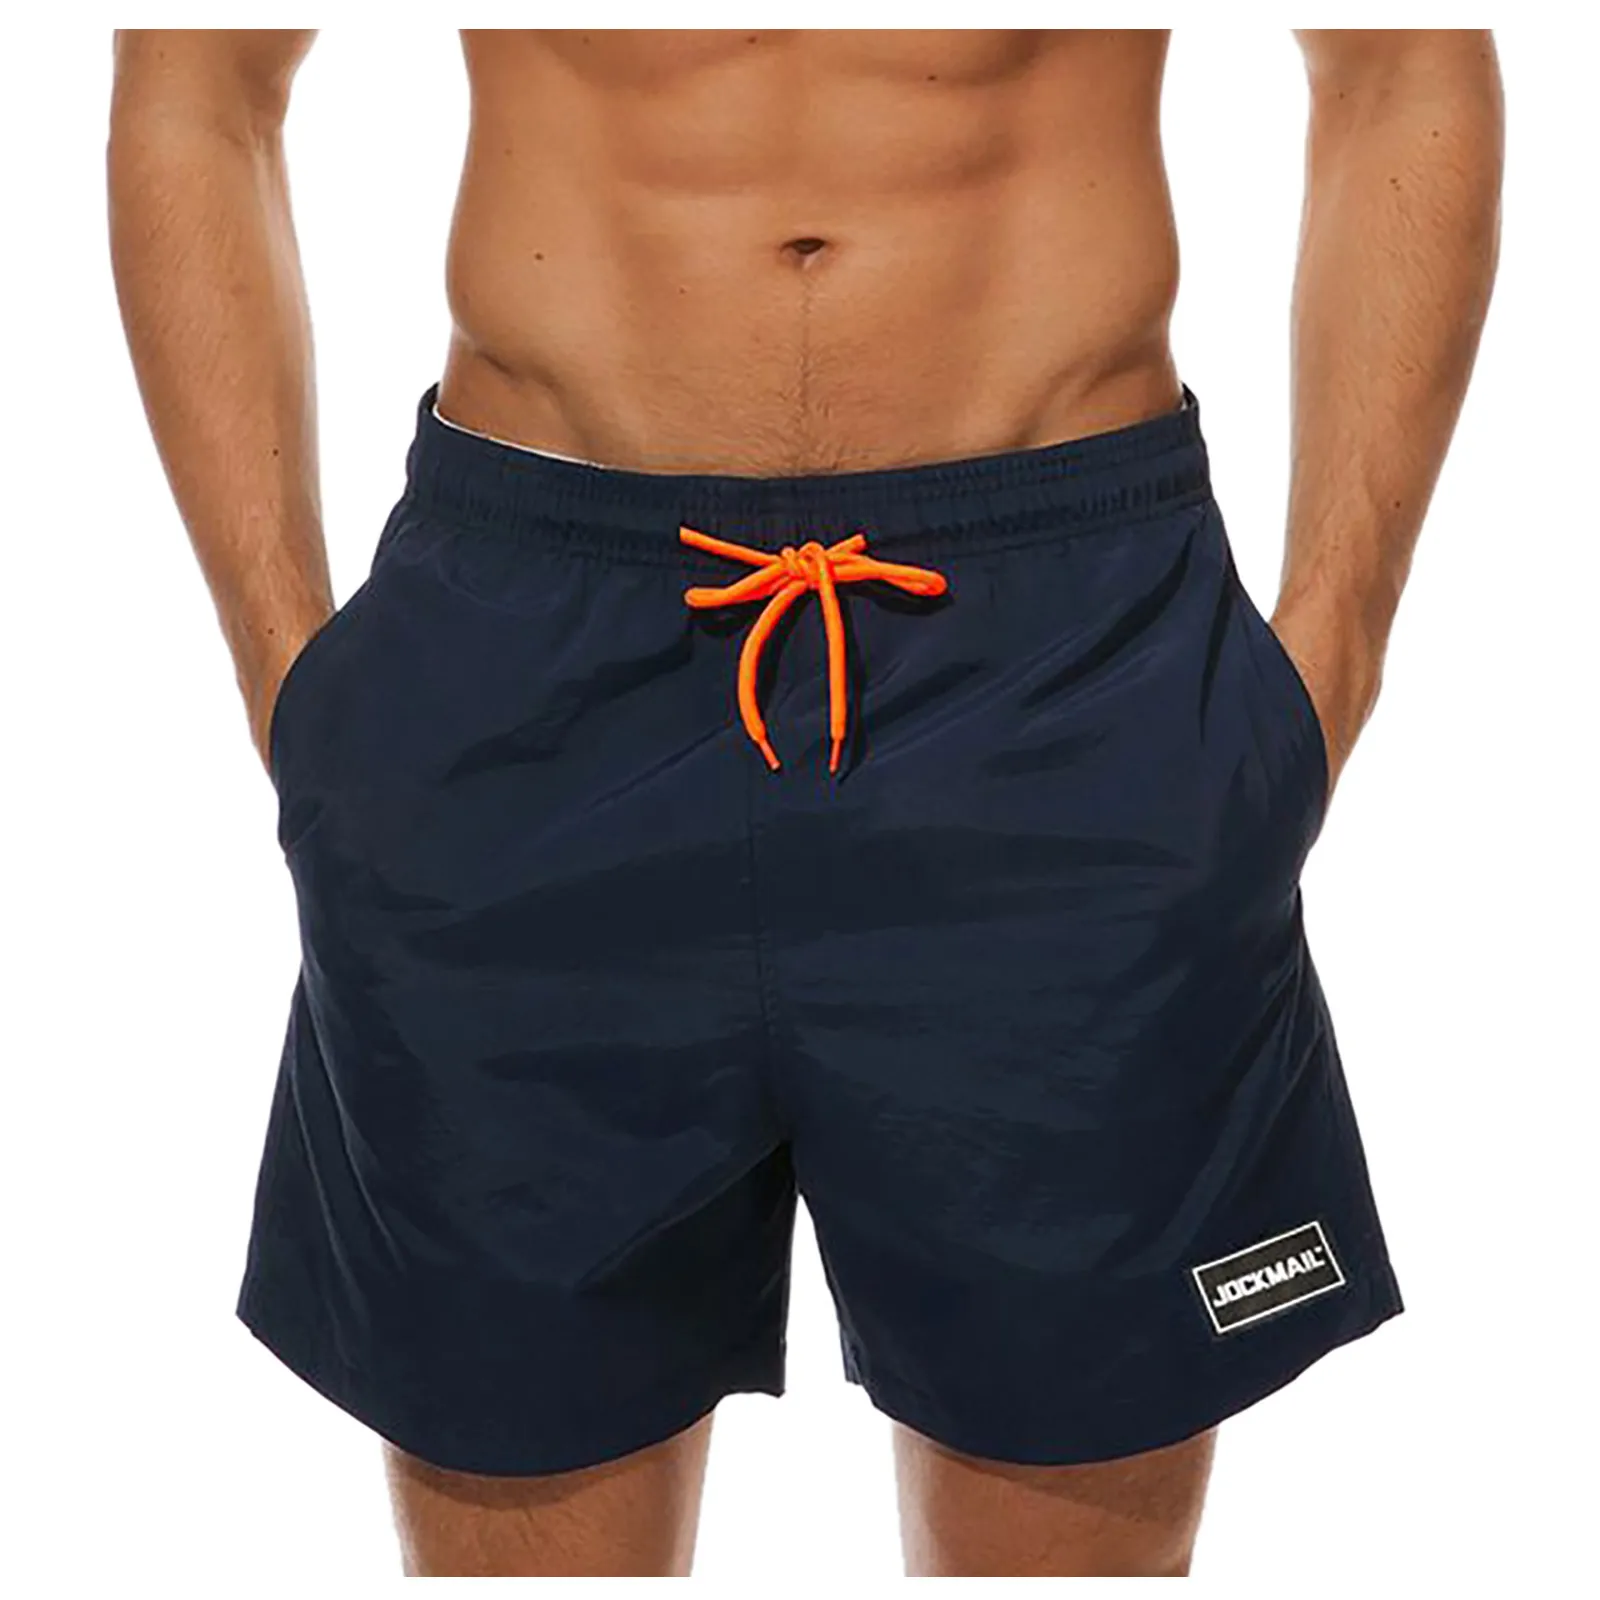 

Summer Men's Solid Colors Drawstring Swim Trunks Quick Dry Beach Swimming Board Shorts Bathing Suit With Mesh Lining Pocket#g3